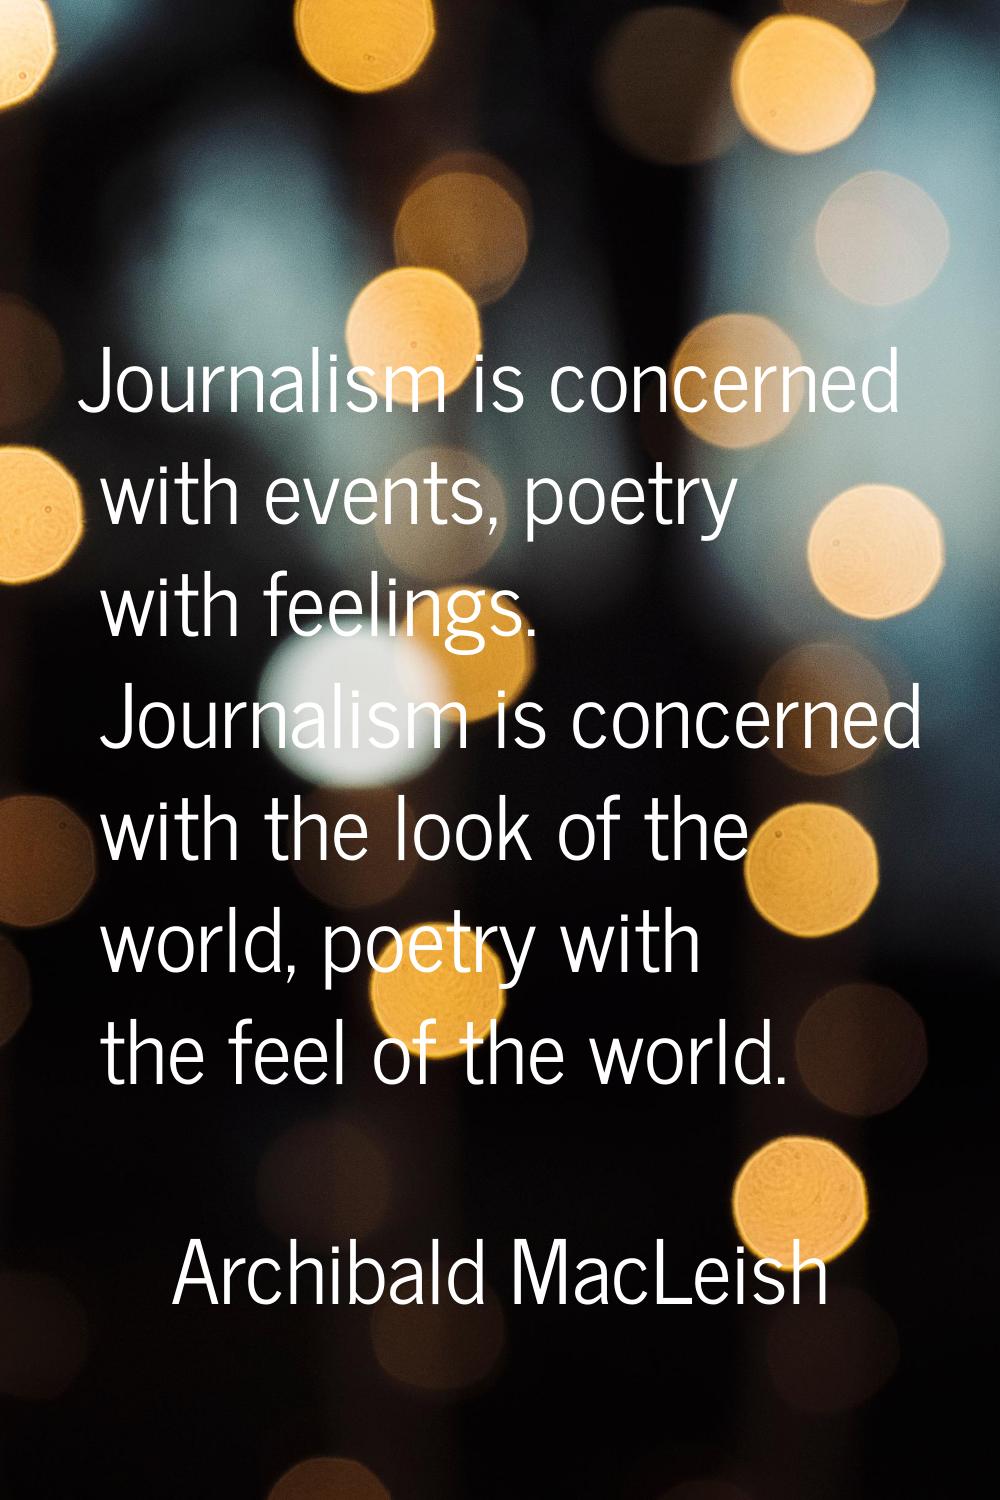 Journalism is concerned with events, poetry with feelings. Journalism is concerned with the look of